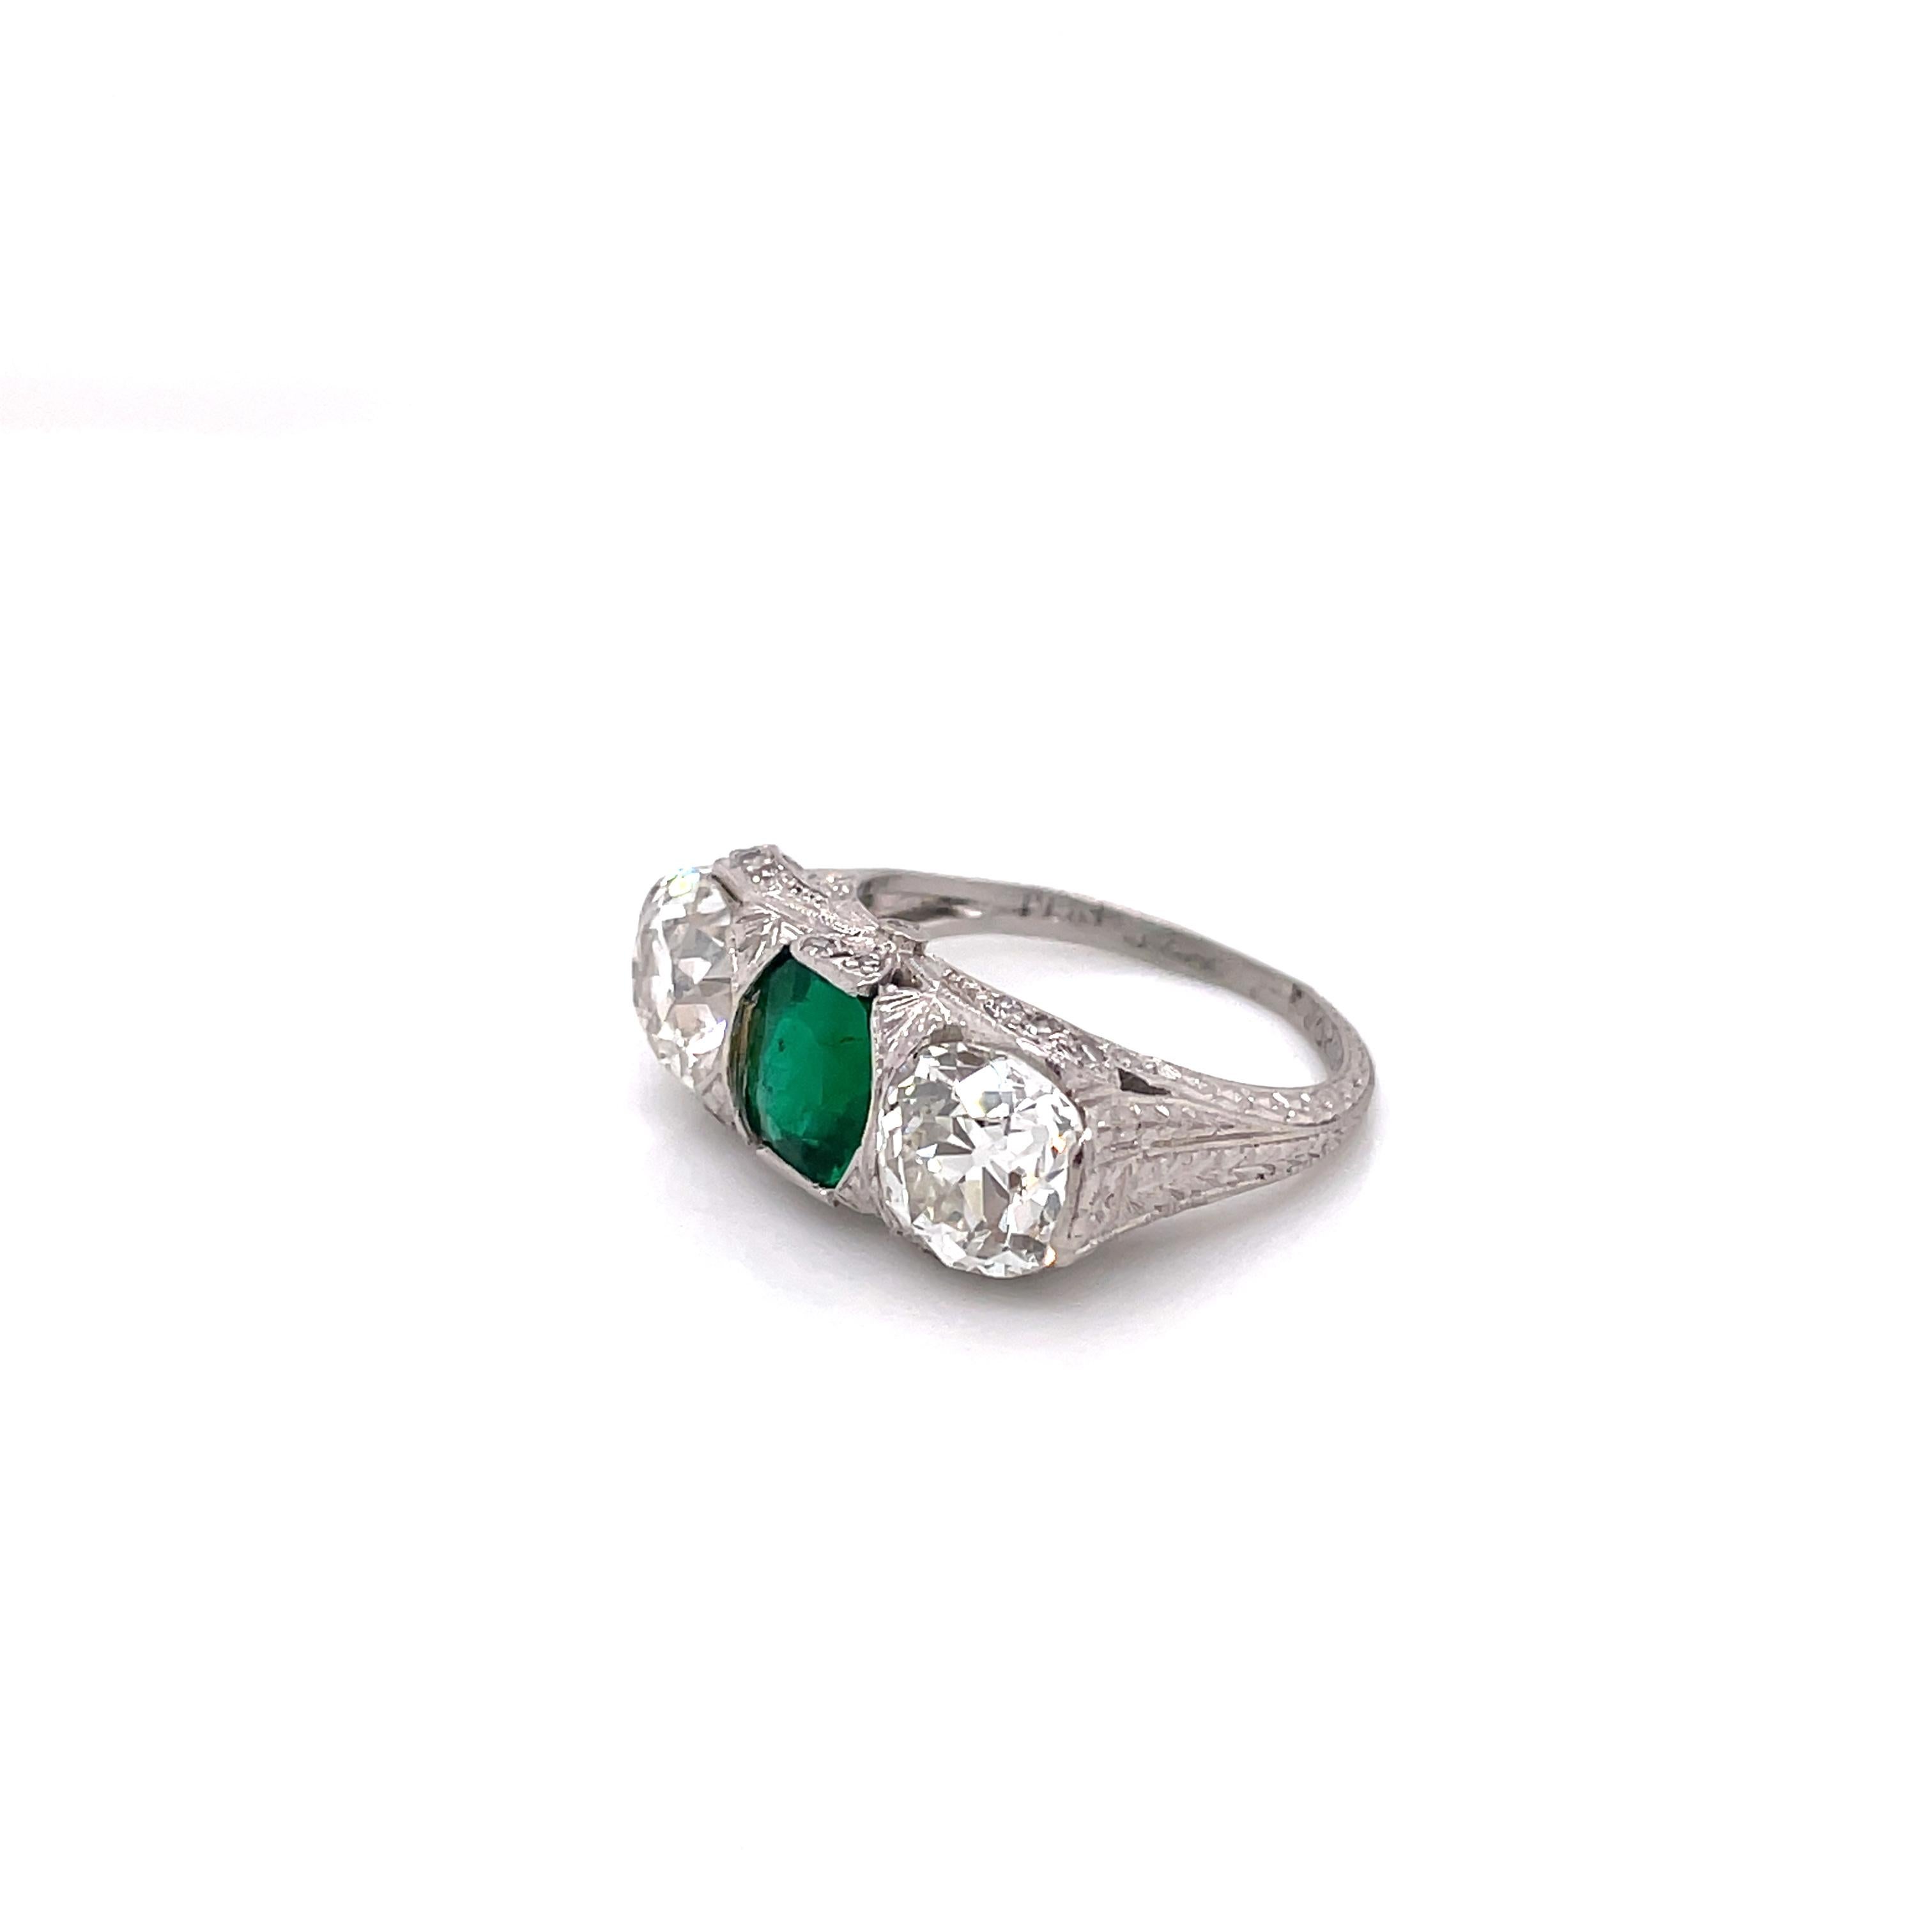 Stunning Art Deco Three-Stone ring with a approximately 1.30CT Emerald as the center stone. There are 2 Old European cut VS1-VS2 diamonds on each side of the emerald. There are 30 Old Mine cut VS diamonds totaling to approximately 0.20CTTW on the